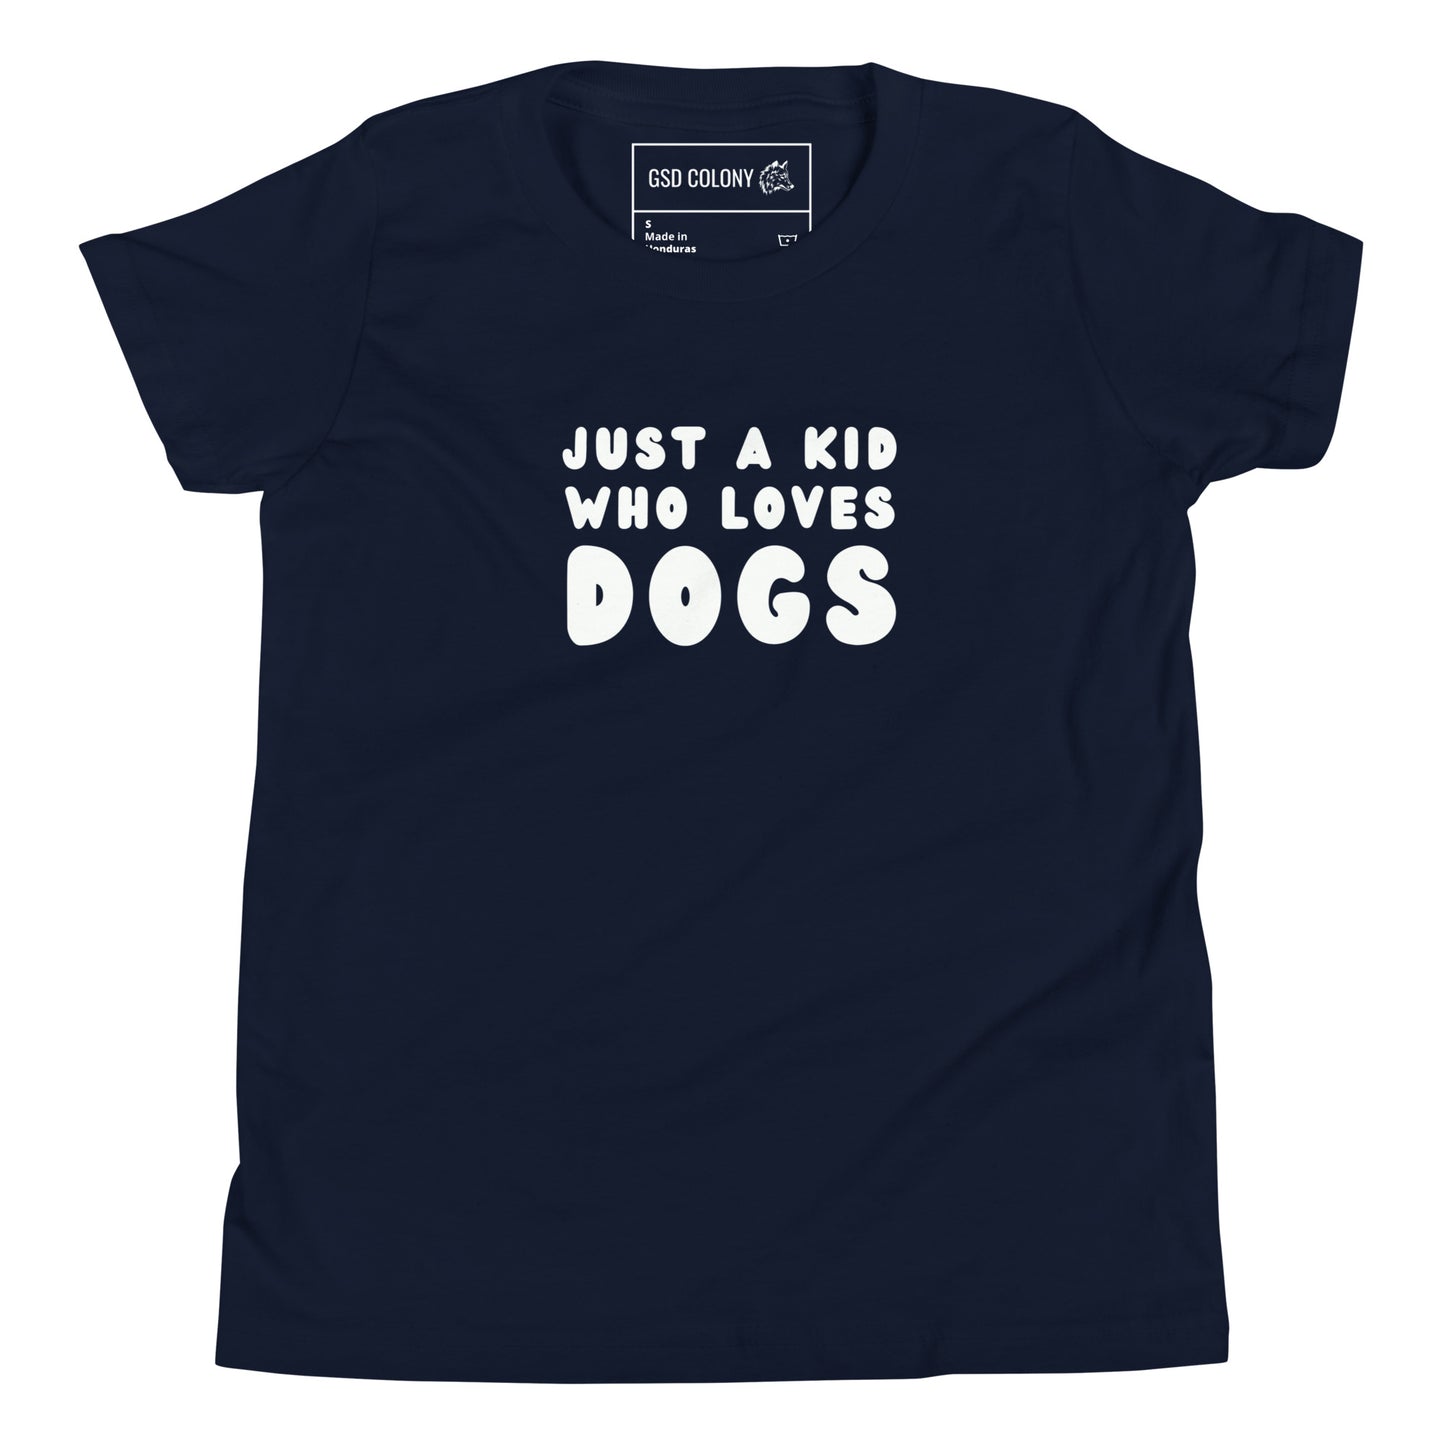 Just a kid who loves dogs kid tshirt for German Shepherd lovers, navy blue color - GSD Colony